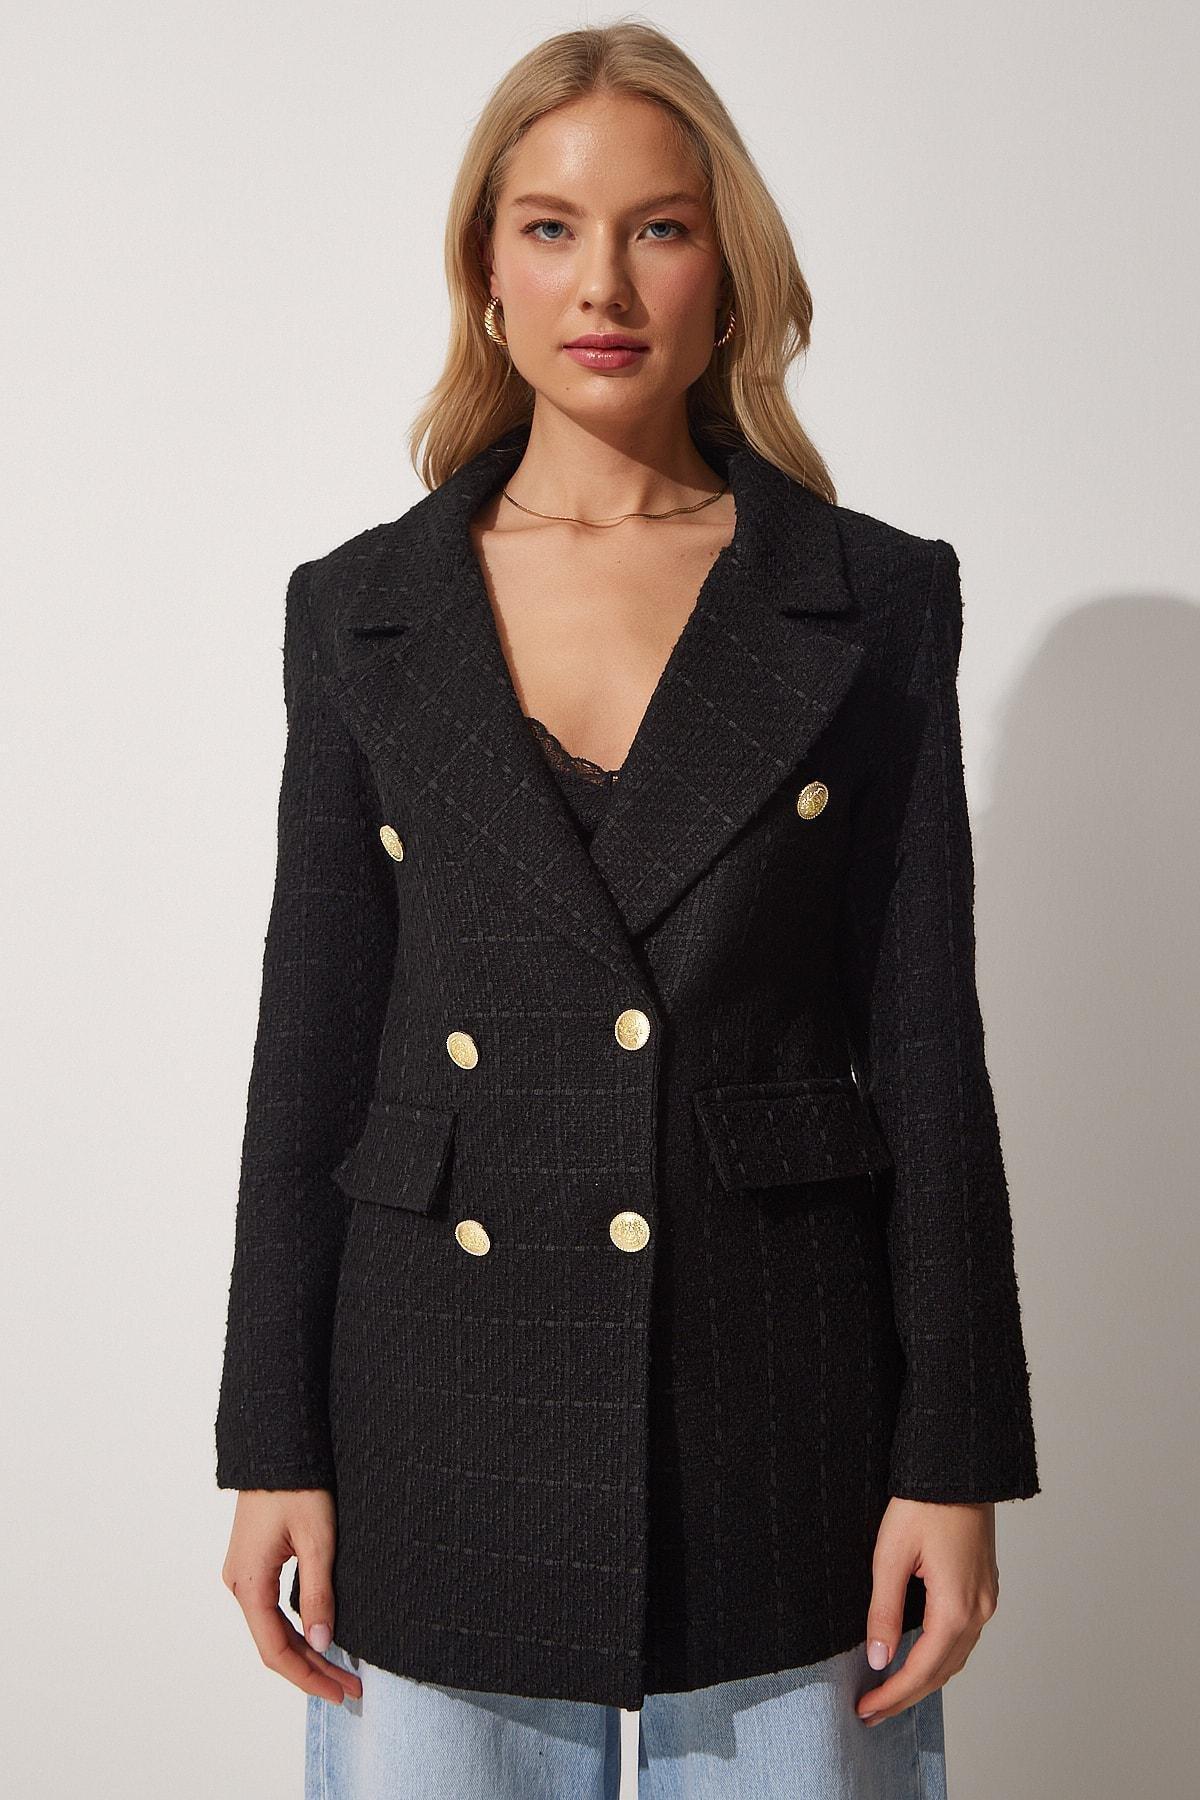 Happiness Istanbul - Black Double-Breasted Lapel Collar Blazer